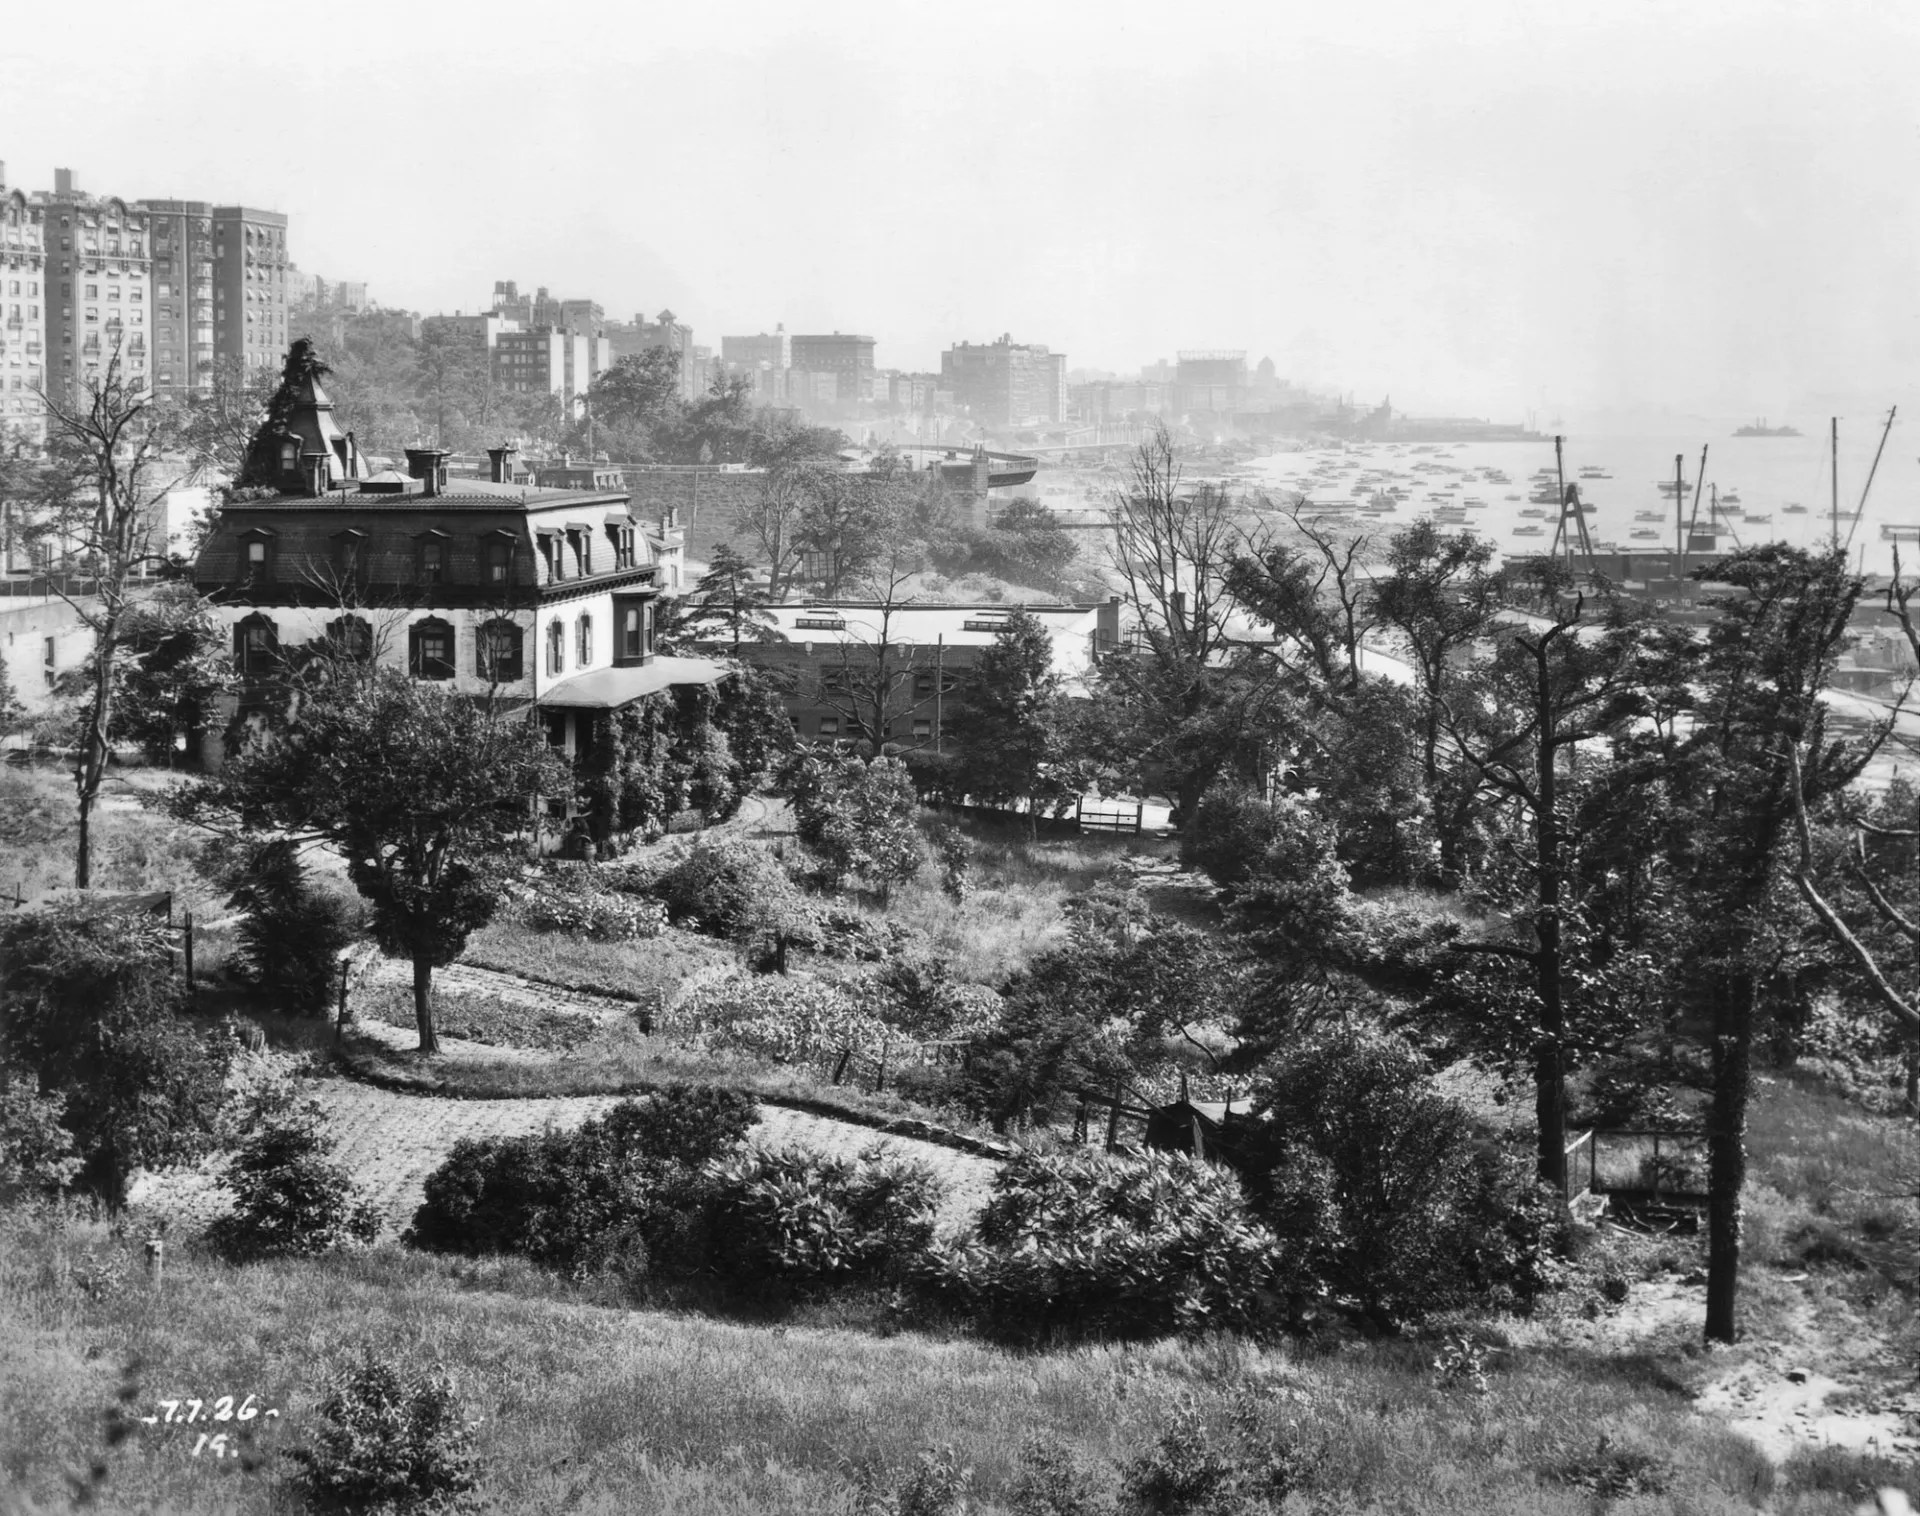 A three-story house surrounded by a lawn and gardens overlooks the Hudson River. Tall apartment buildings are visible in the background.